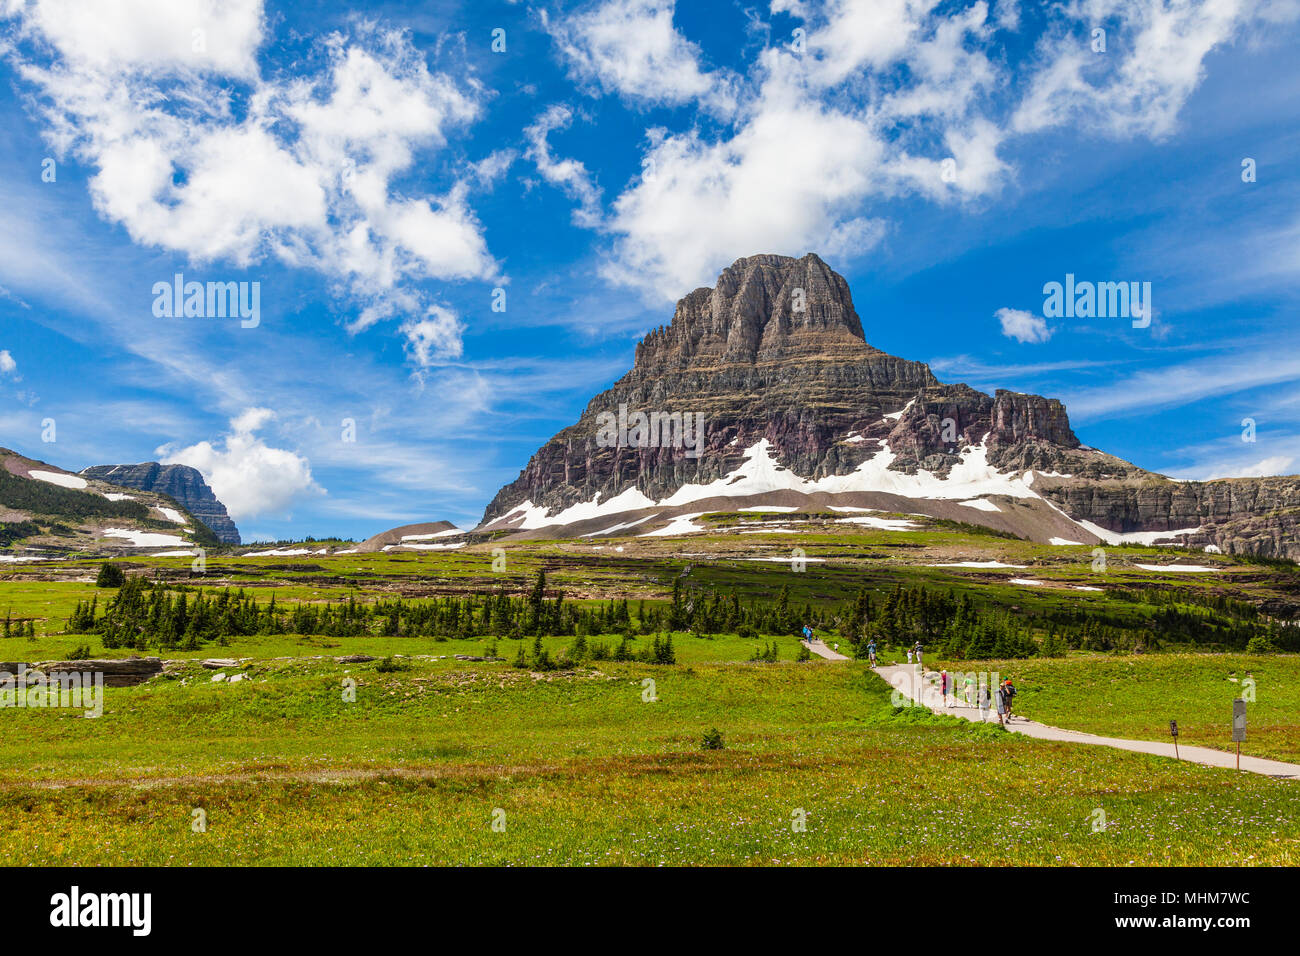 Clements Mountain at Logan Pass in Glacier National Park in Montana. This scene is among the signature images of Glacier NP. Stock Photo